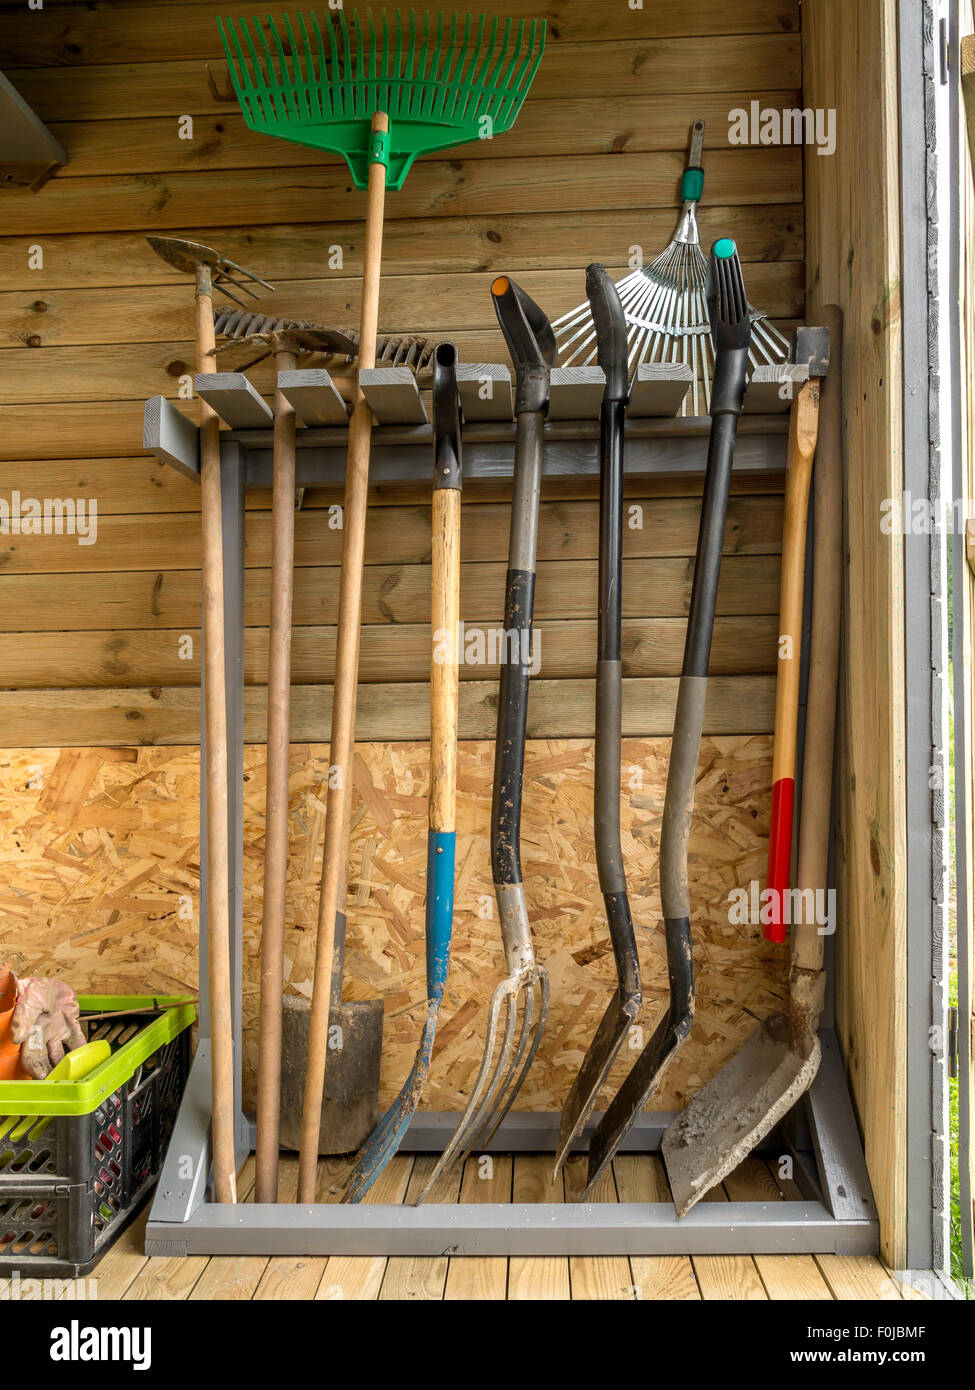 Wooden rack with different garden tools and equipment Stock Photo